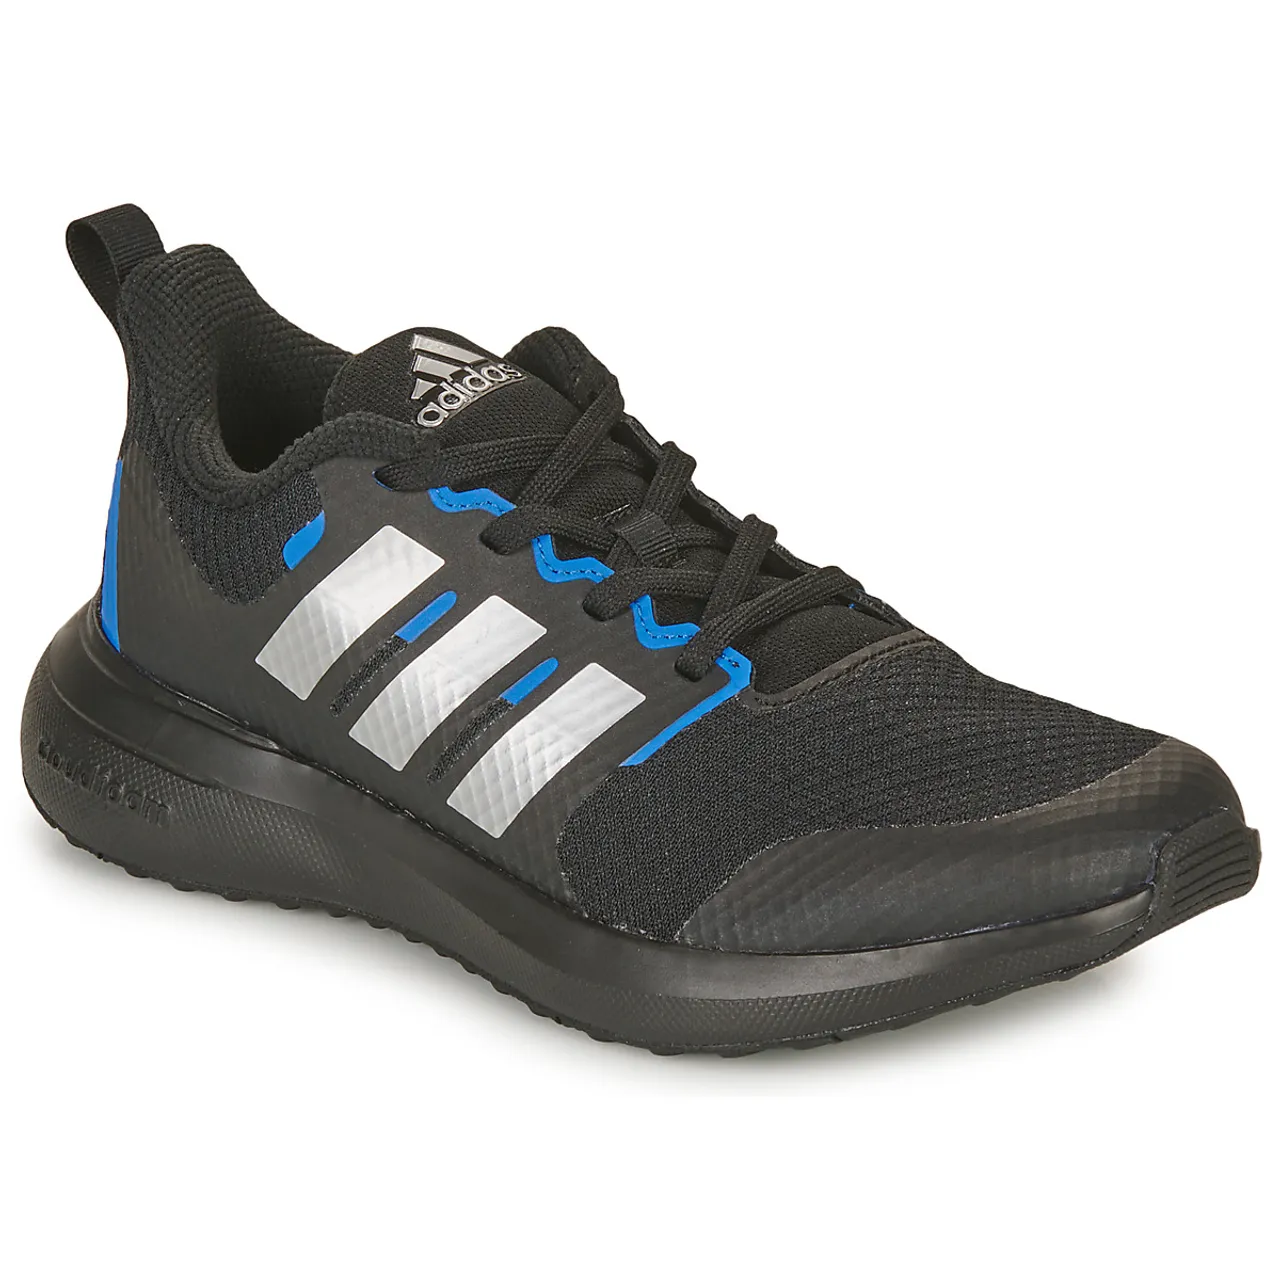 adidas  FortaRun 2.0 K  boys's Children's Shoes (Trainers) in Black